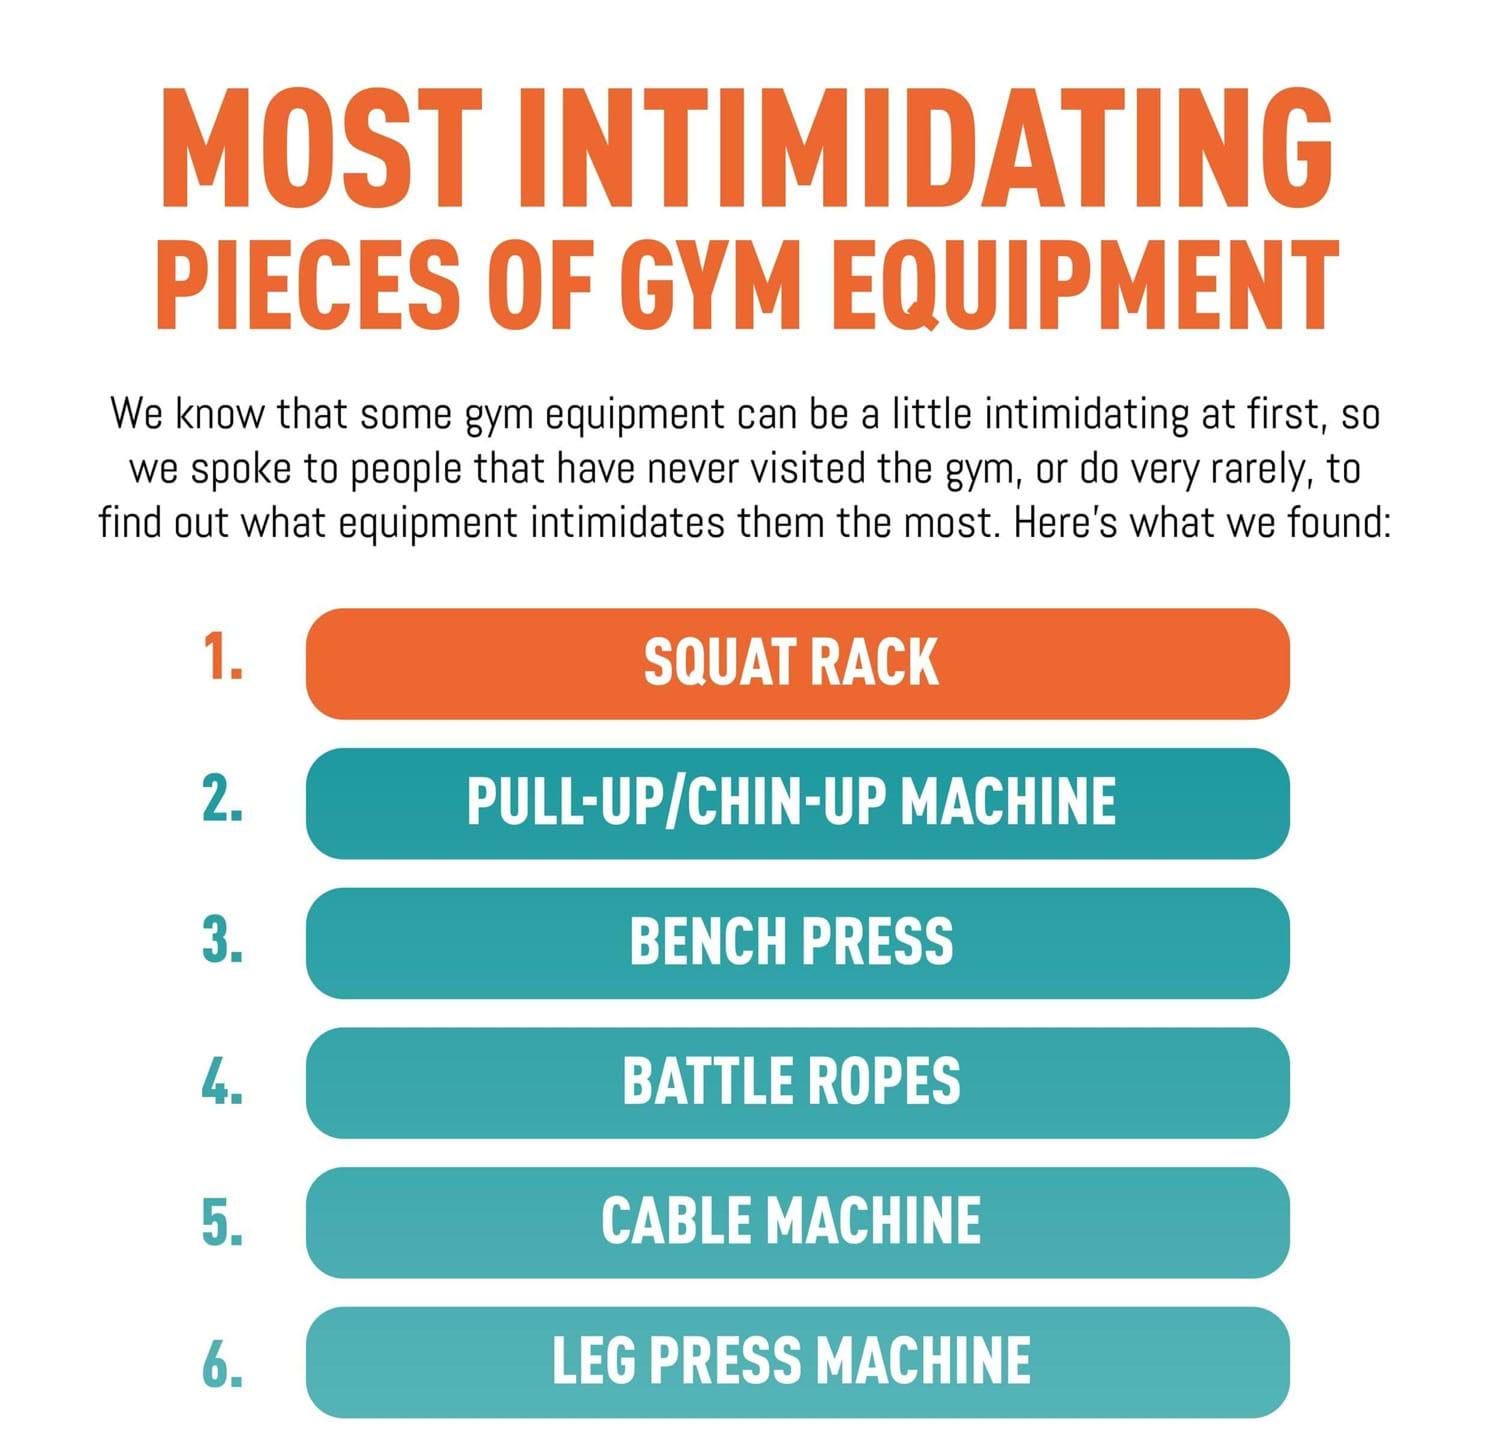 Most intimidating pieces of gym equipment